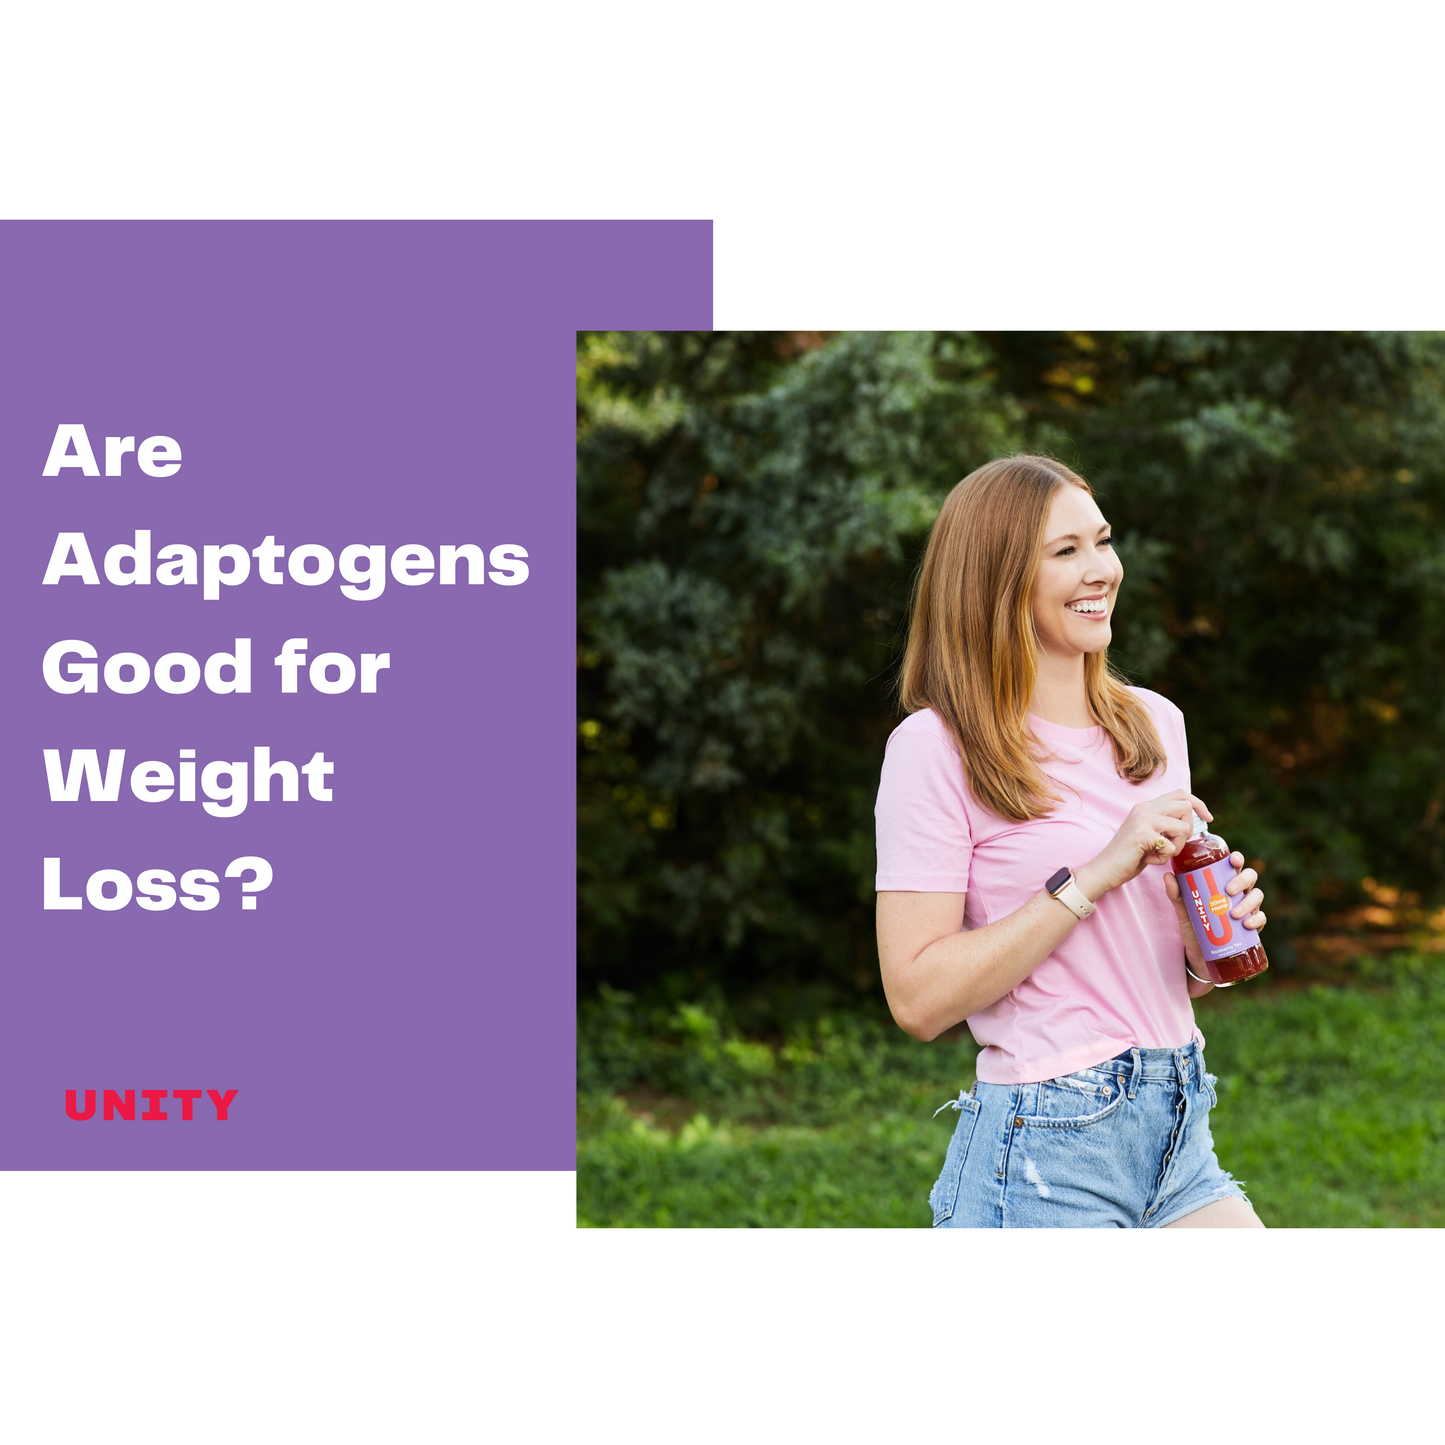 Are Adaptogens Good for Weight Loss?